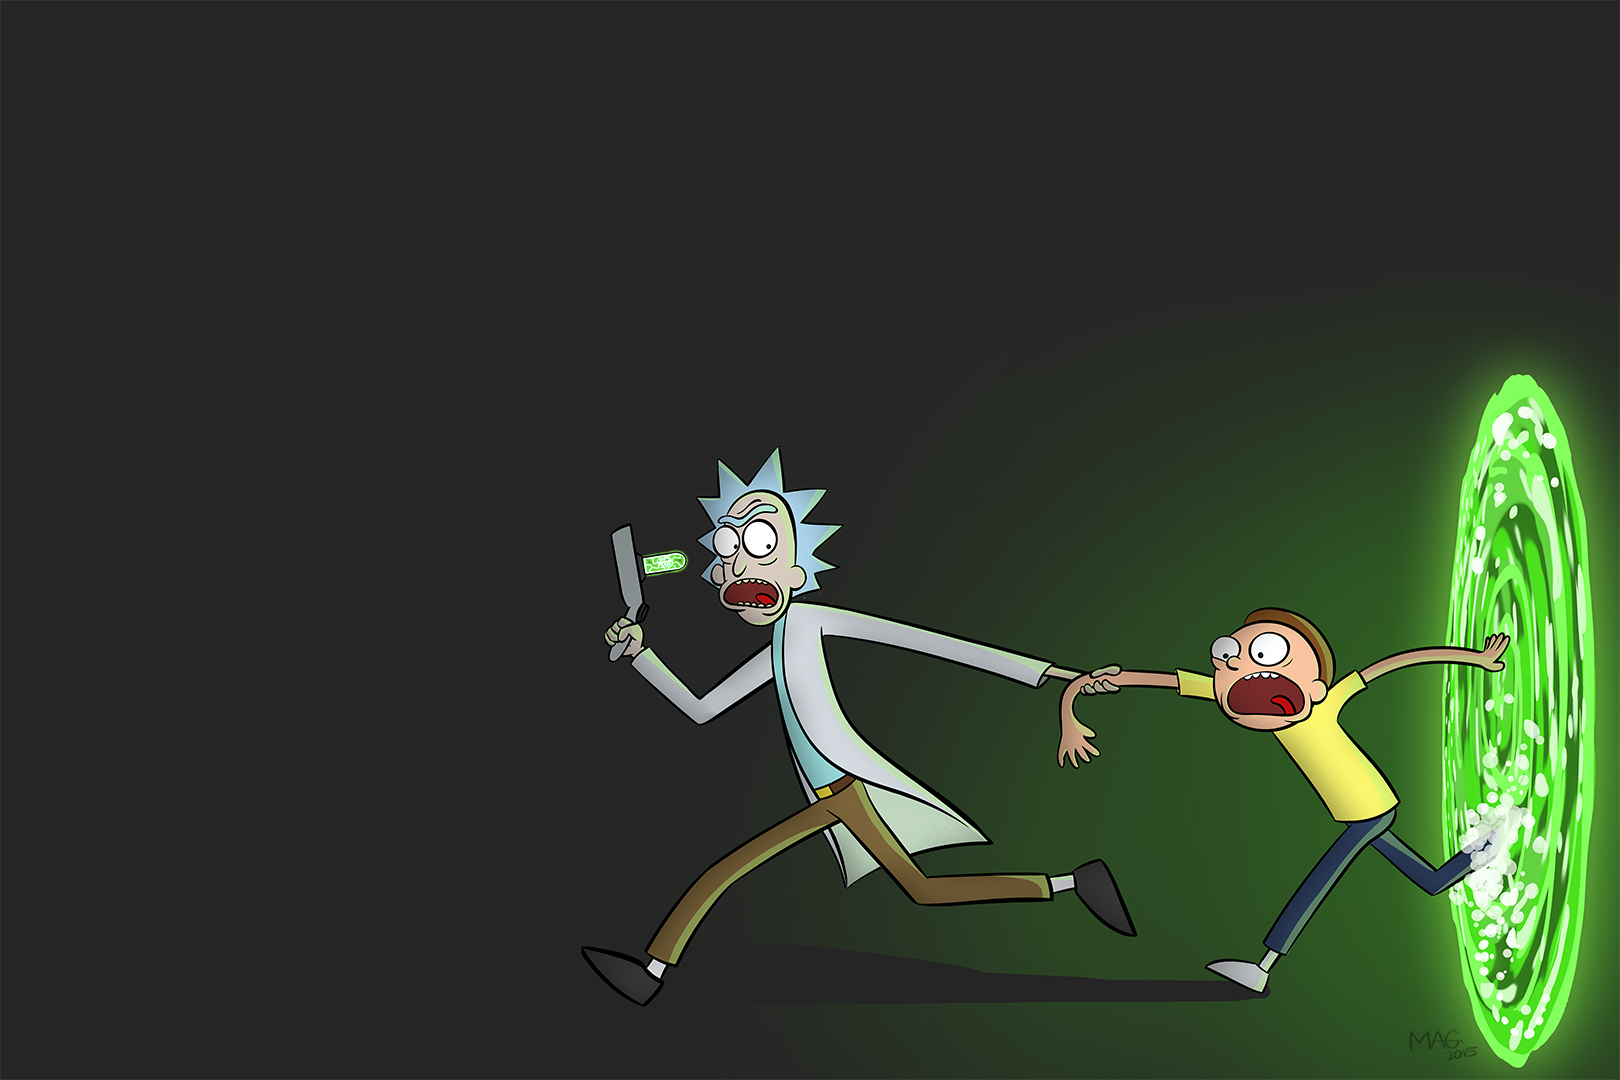 100+] Rick And Morty Wallpapers on